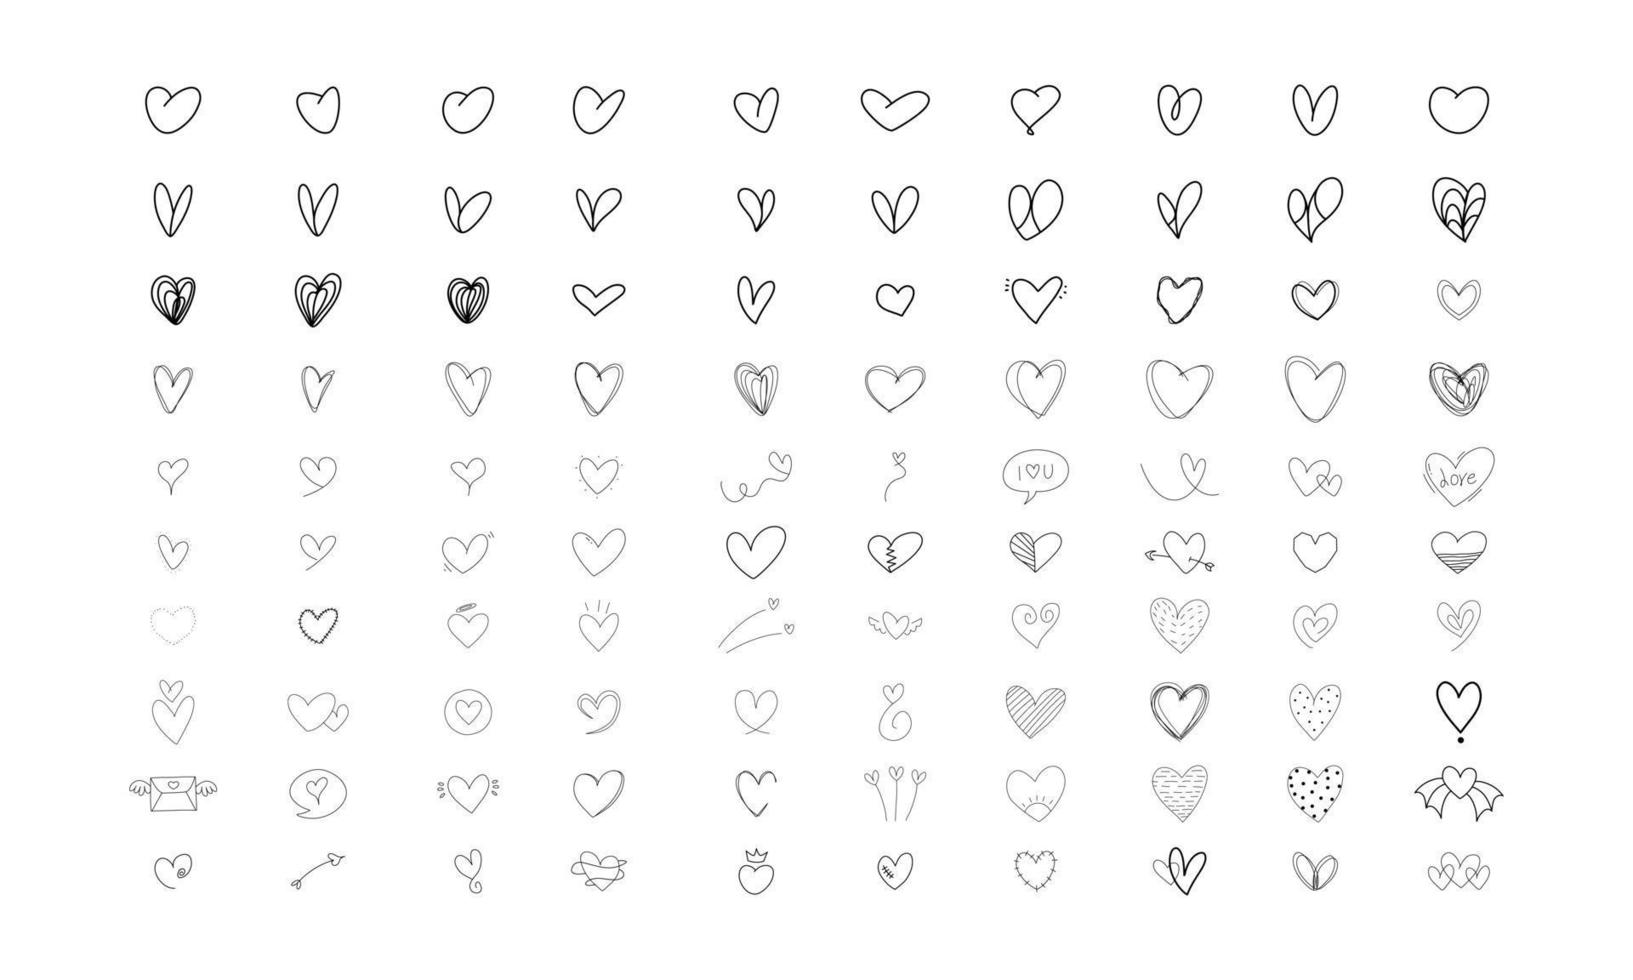 Hearts doodle on a white background. Vector hand drawn outline symbols for love, wedding, Valentine's day or other romantic design. Set of 100 various decorative shapes. Black doodle illustrations.